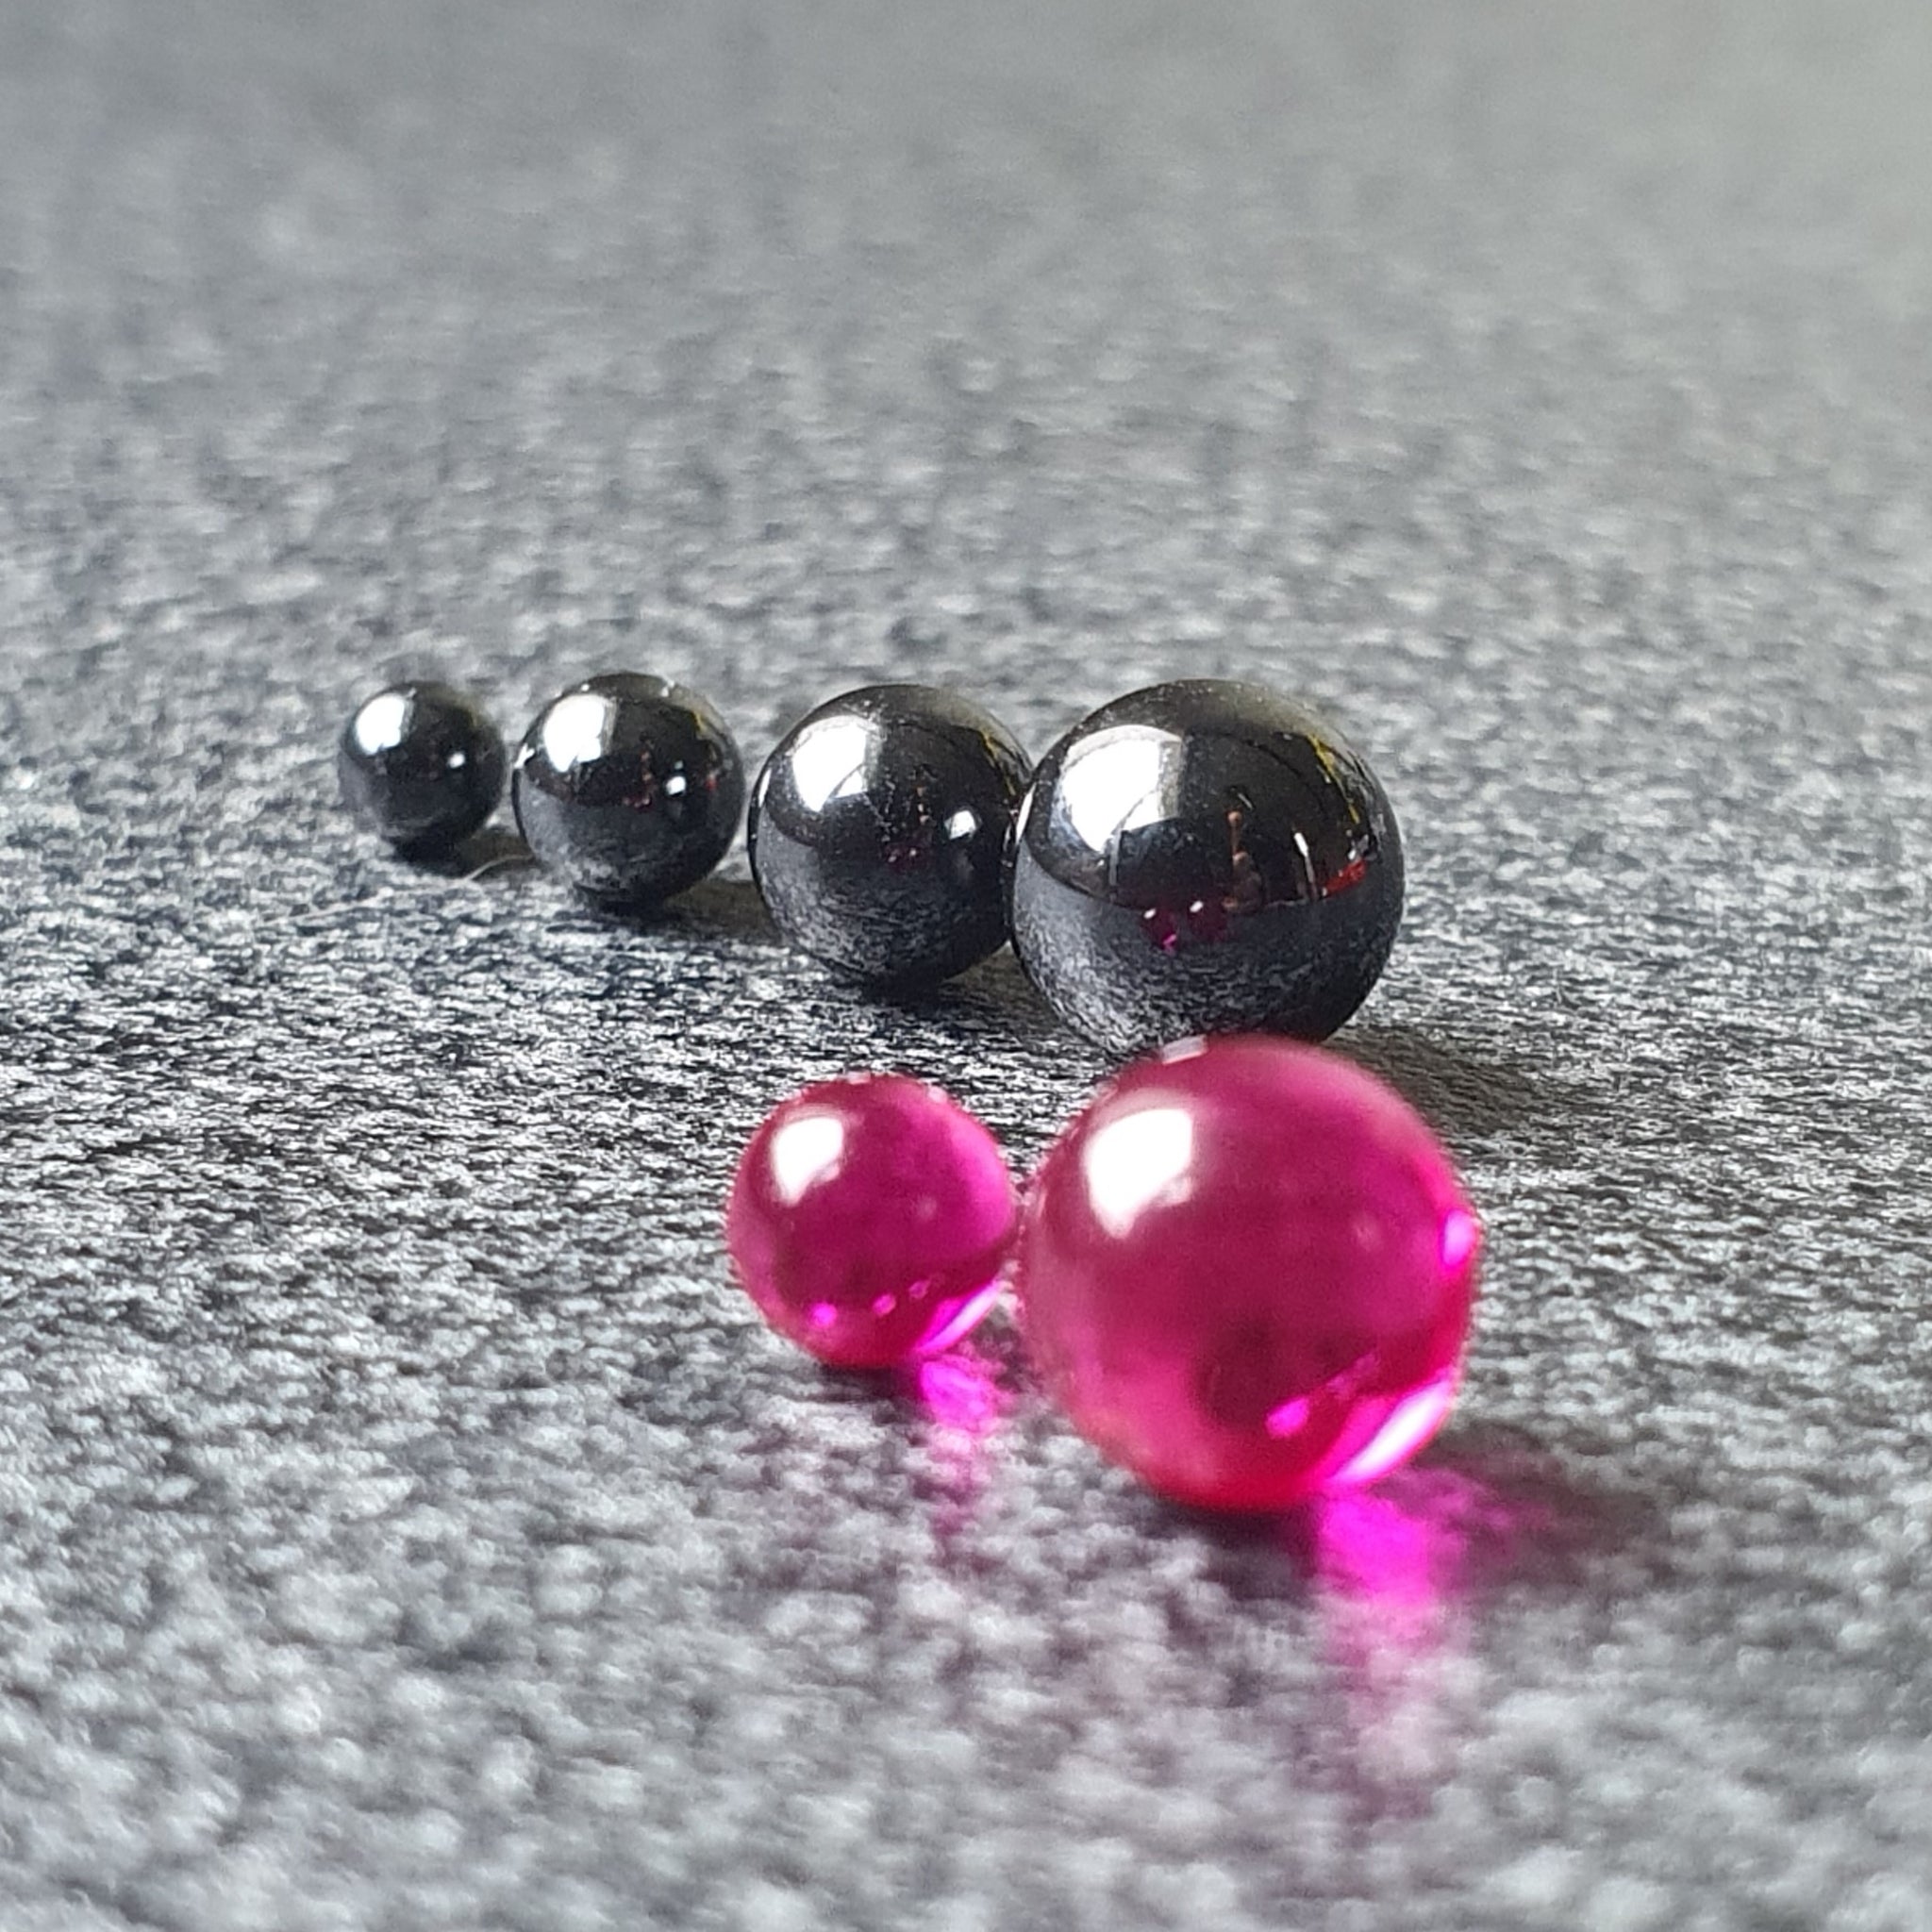 What Are Terp Pearls And How Do They Work - Zamnesia UK